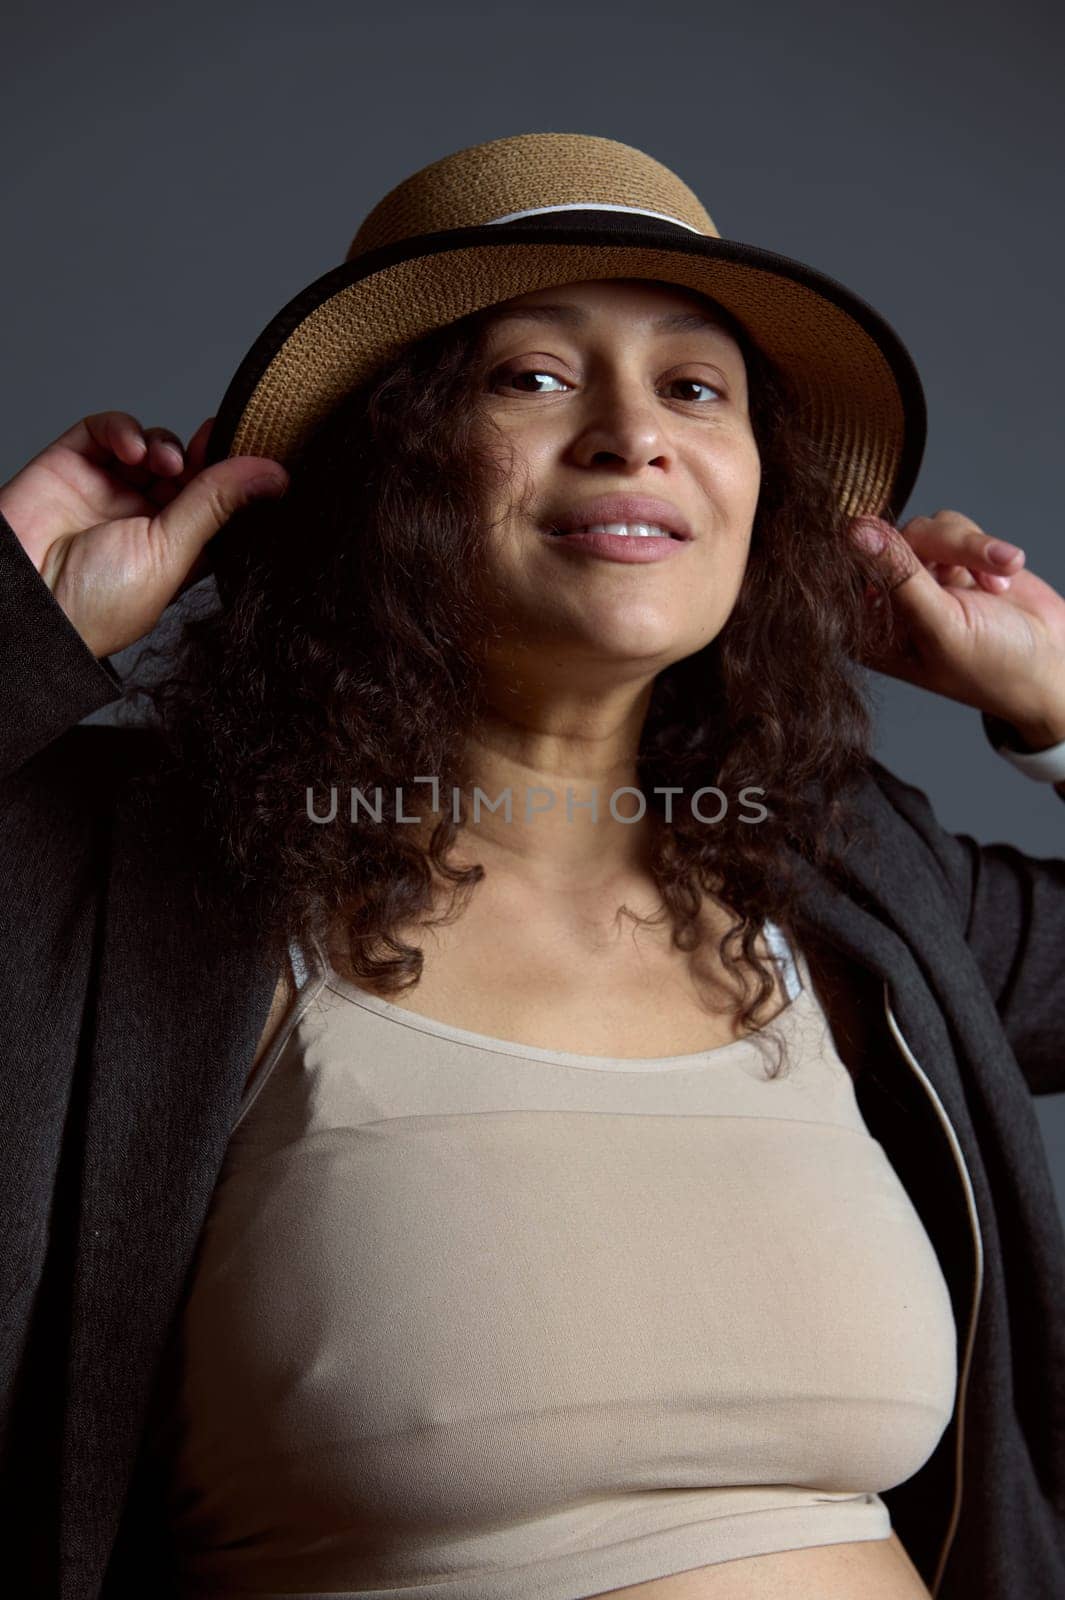 Authentic pregnant woman in beige top, gray blazer and a straw hat, smiling at camera, over fashion gray background by artgf